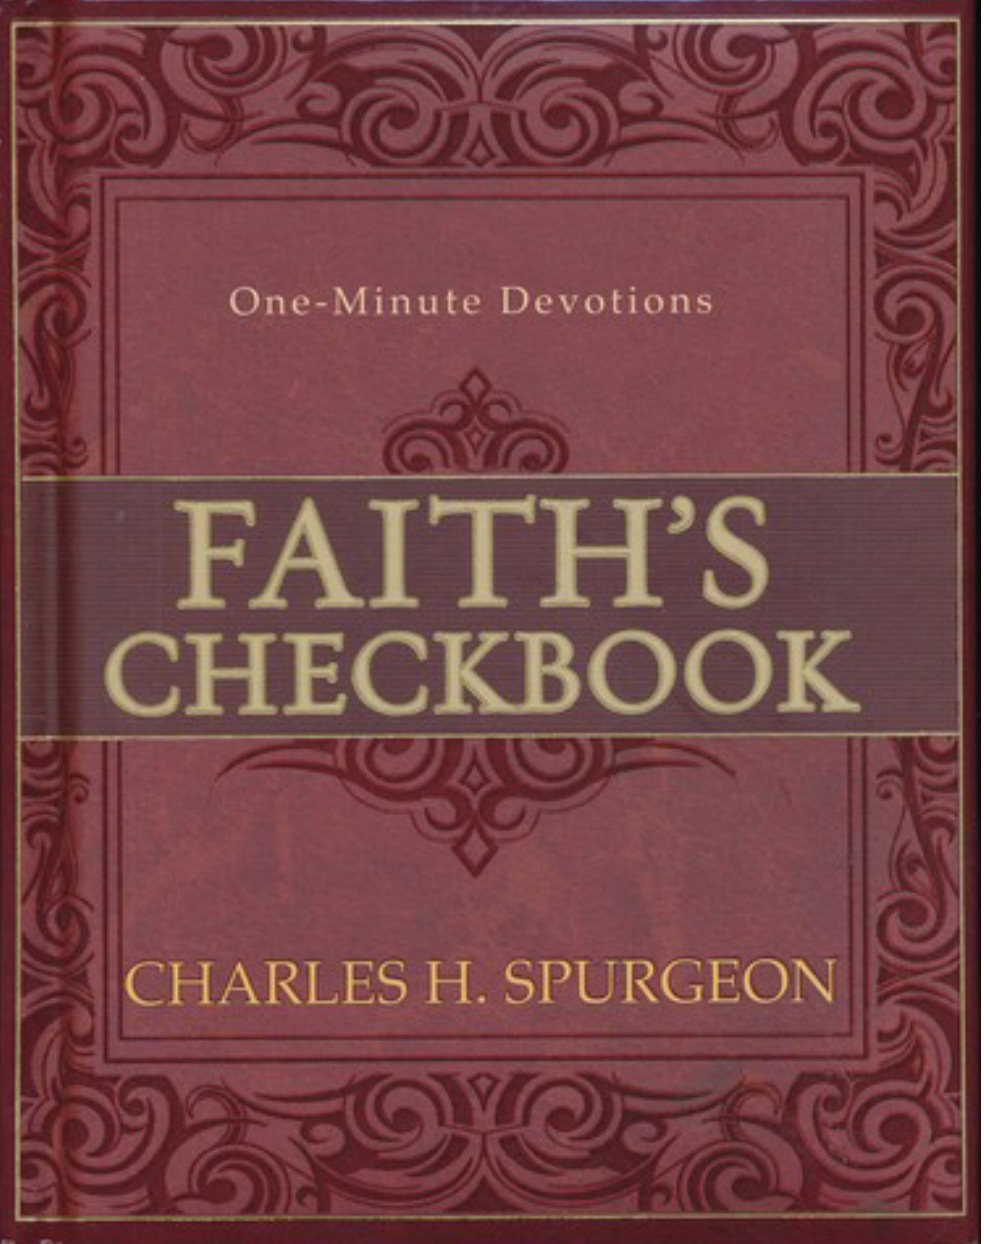 Faith’s Checkbook: One Minute Devotions – Charles H. Spurgeon